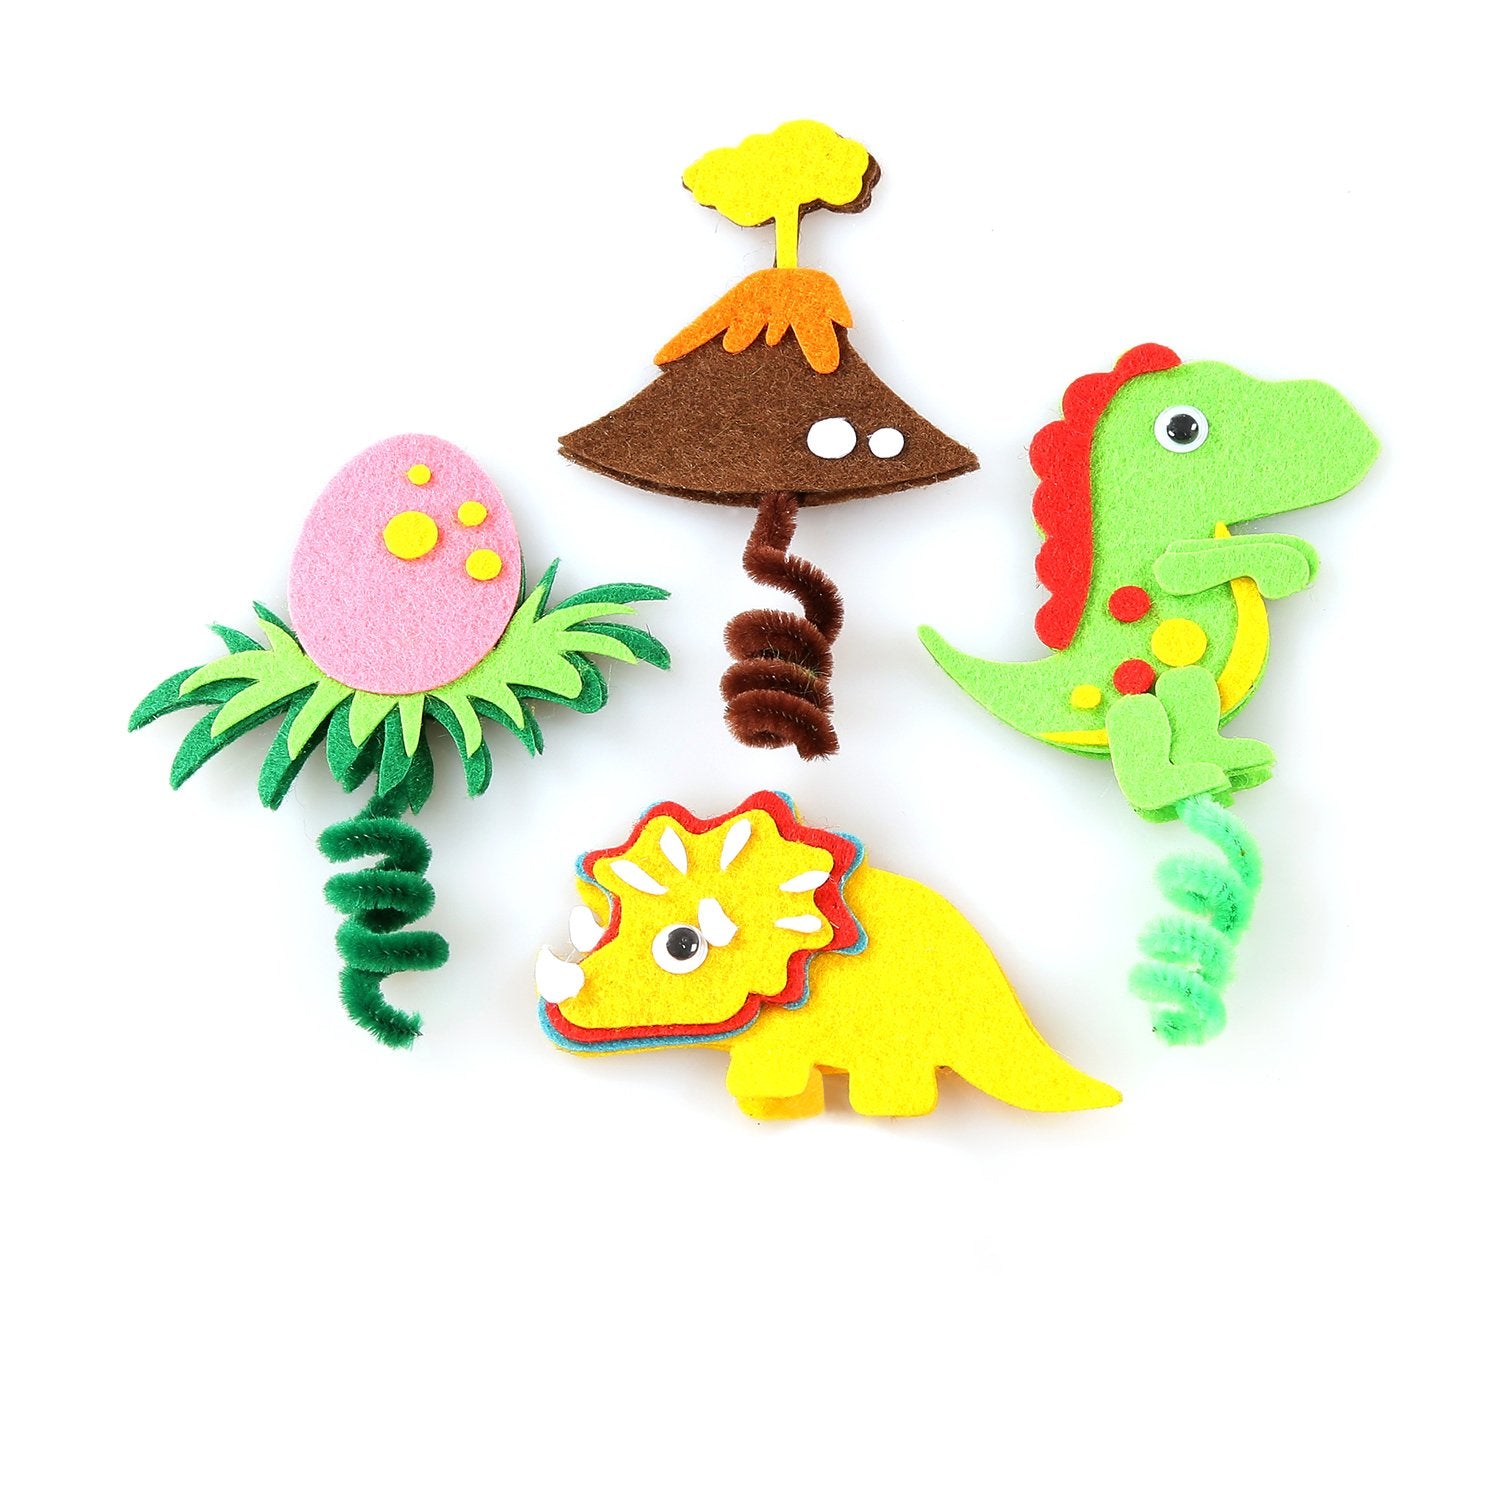 Craft Kit: 3-in 1 Discovering Dinosaurs